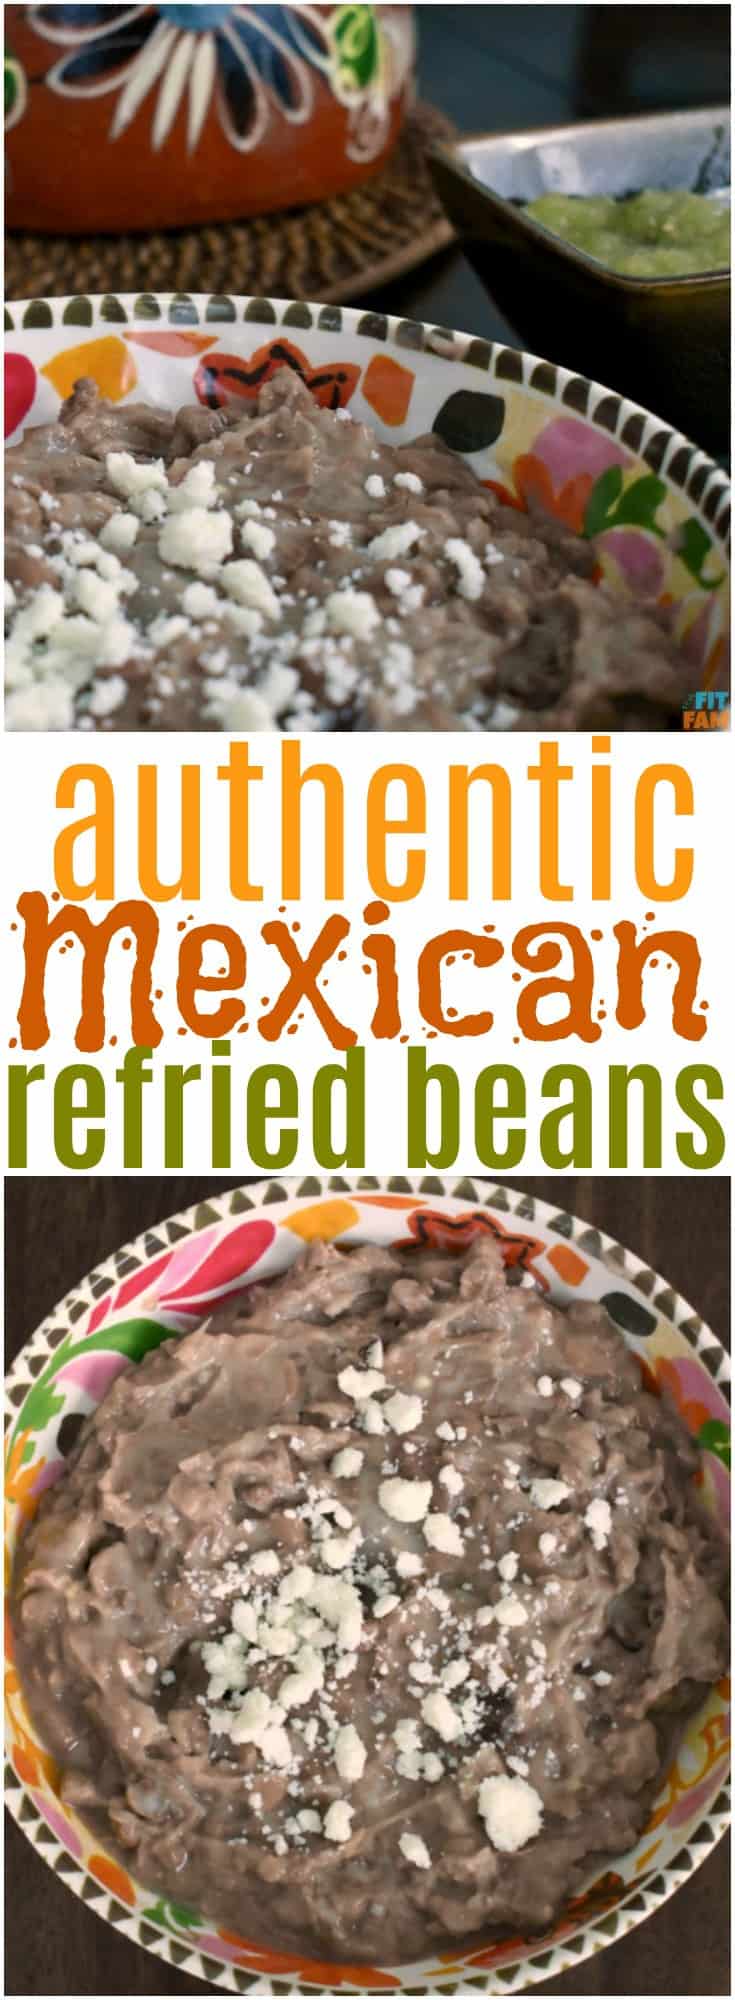 Authentic Mexican Refried Beans - That Fit Fam